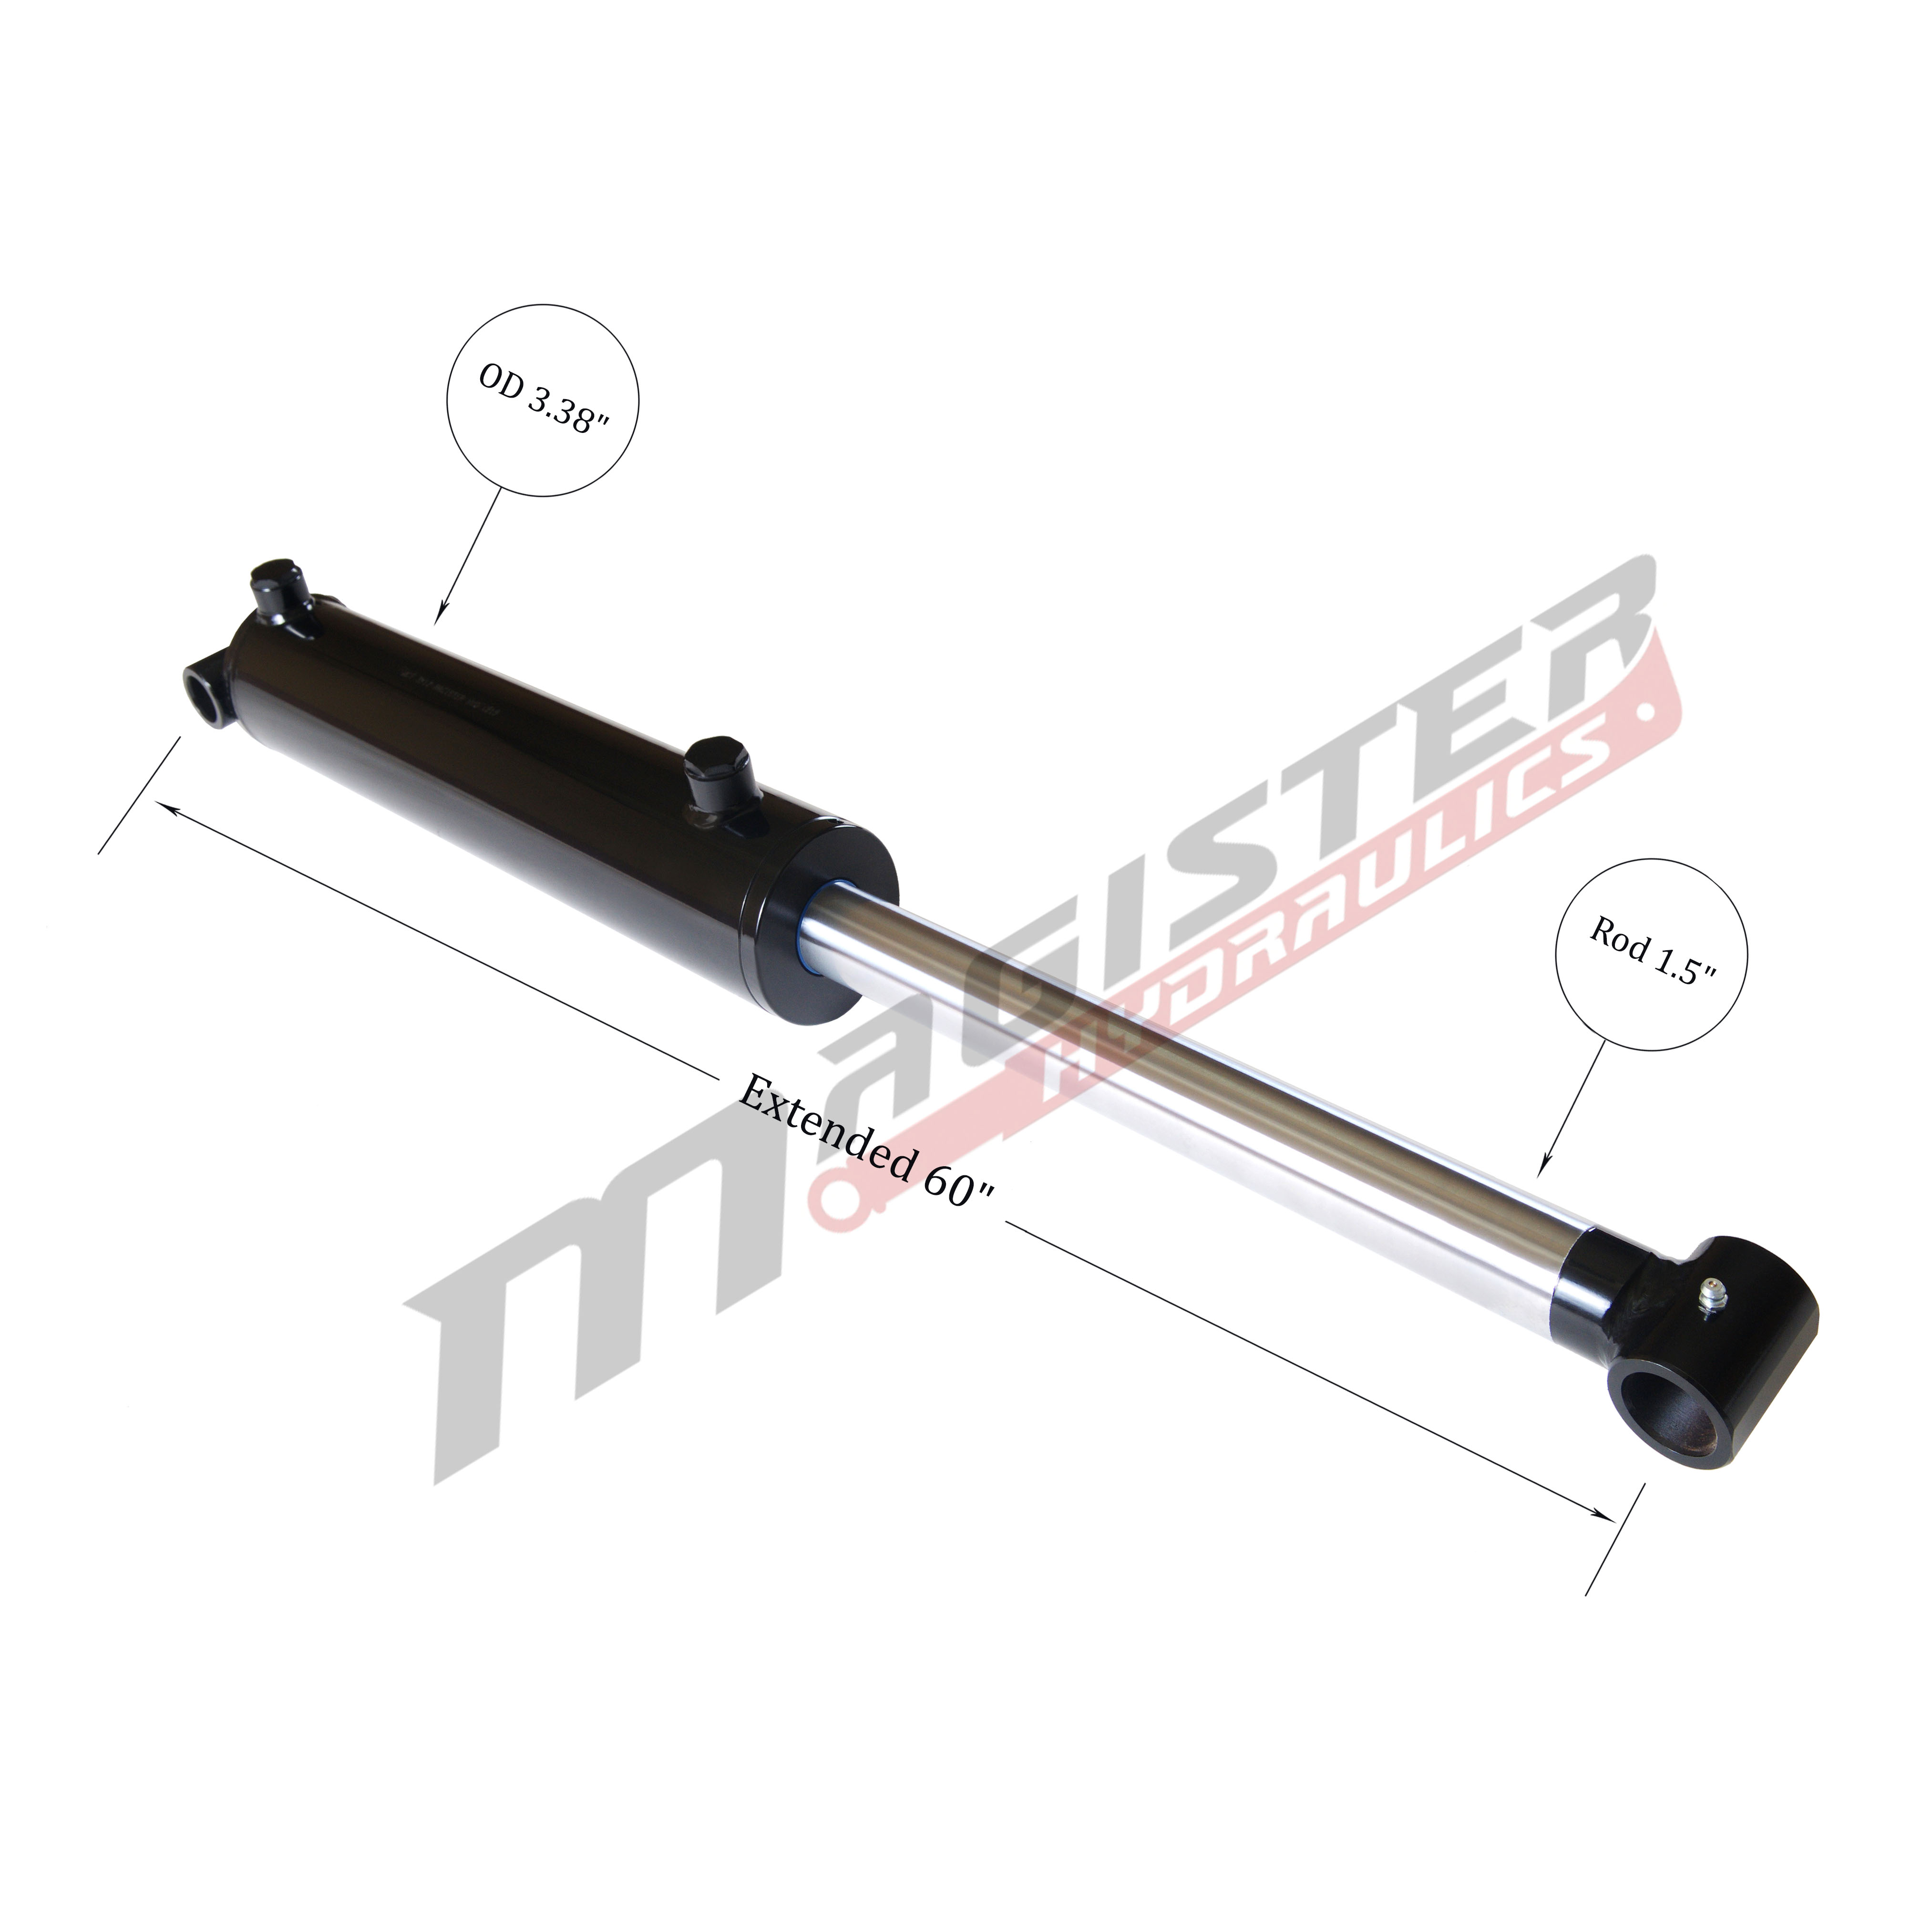 3 bore x 26 stroke hydraulic cylinder, welded cross tube double acting cylinder | Magister Hydraulics